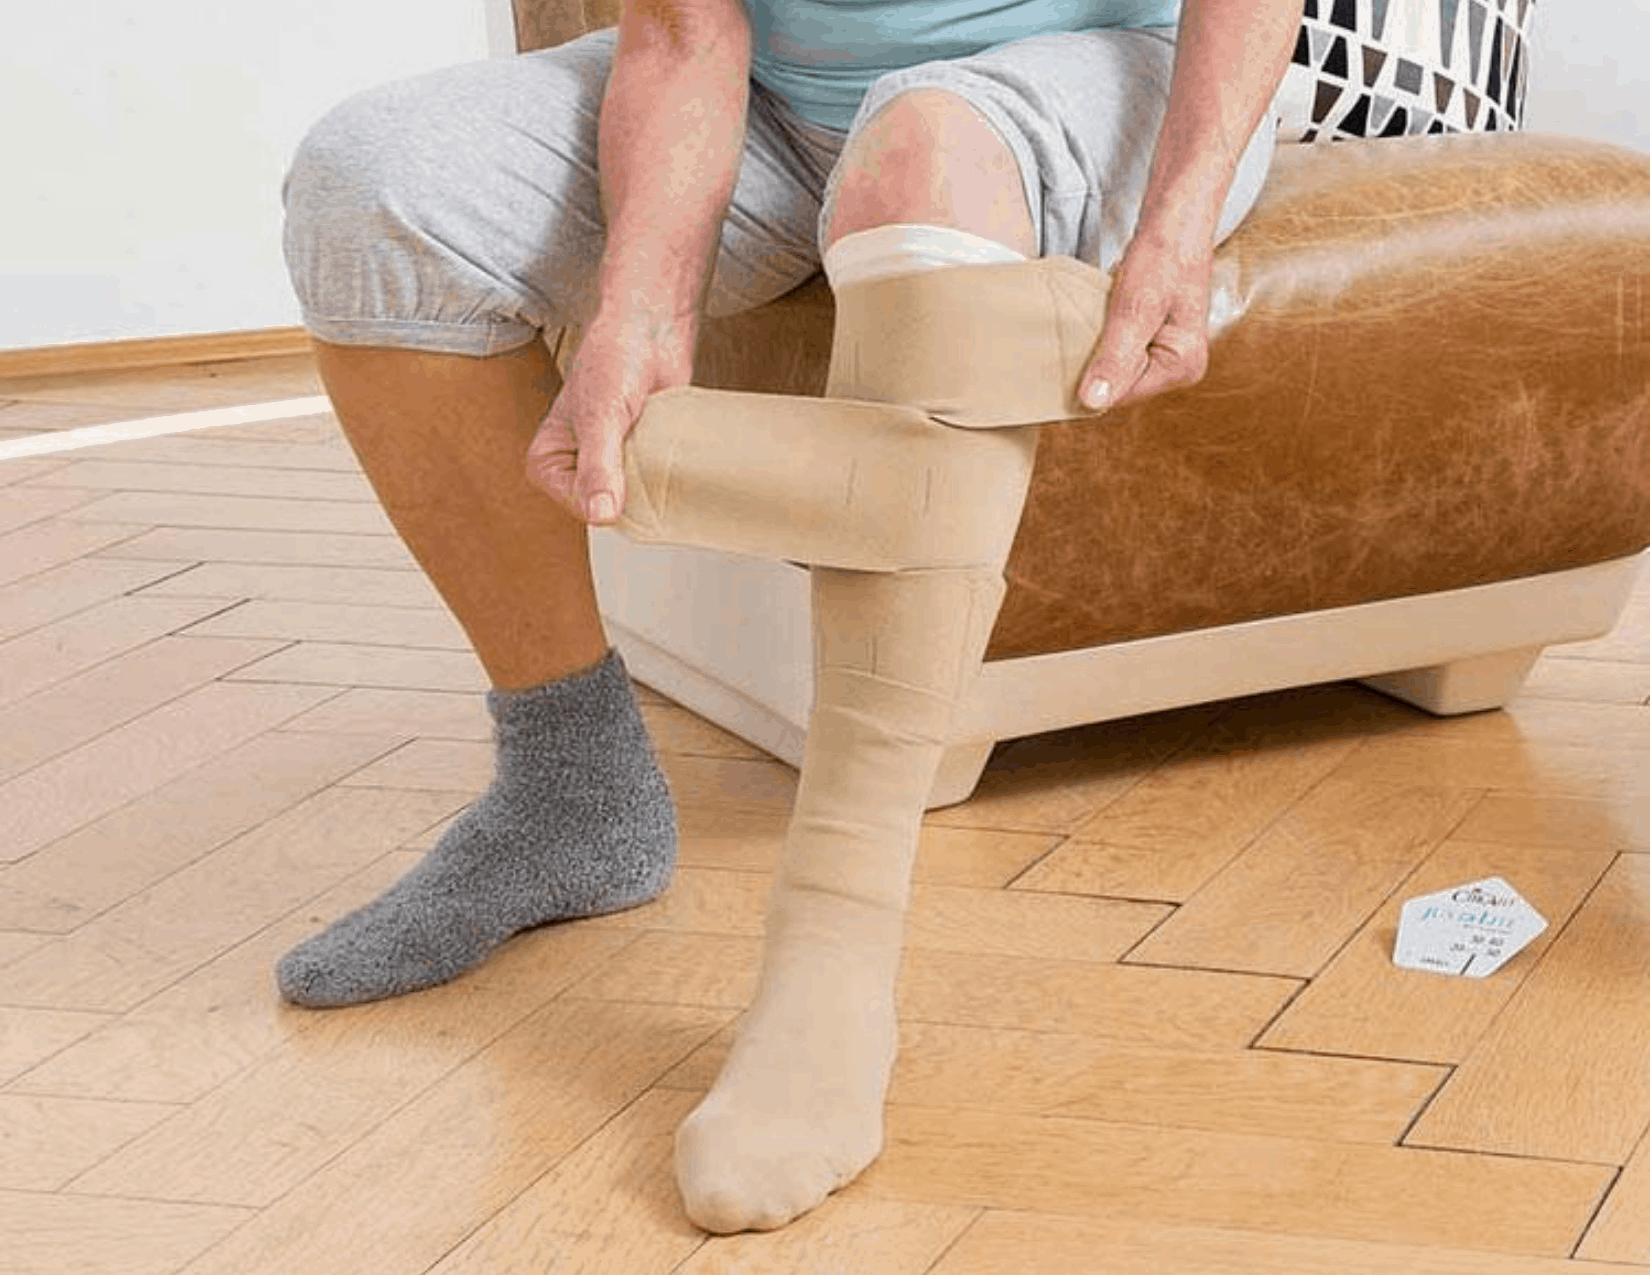 Thigh Medical Supplies: Enhancing Mobility and Comfort at Komfort Health